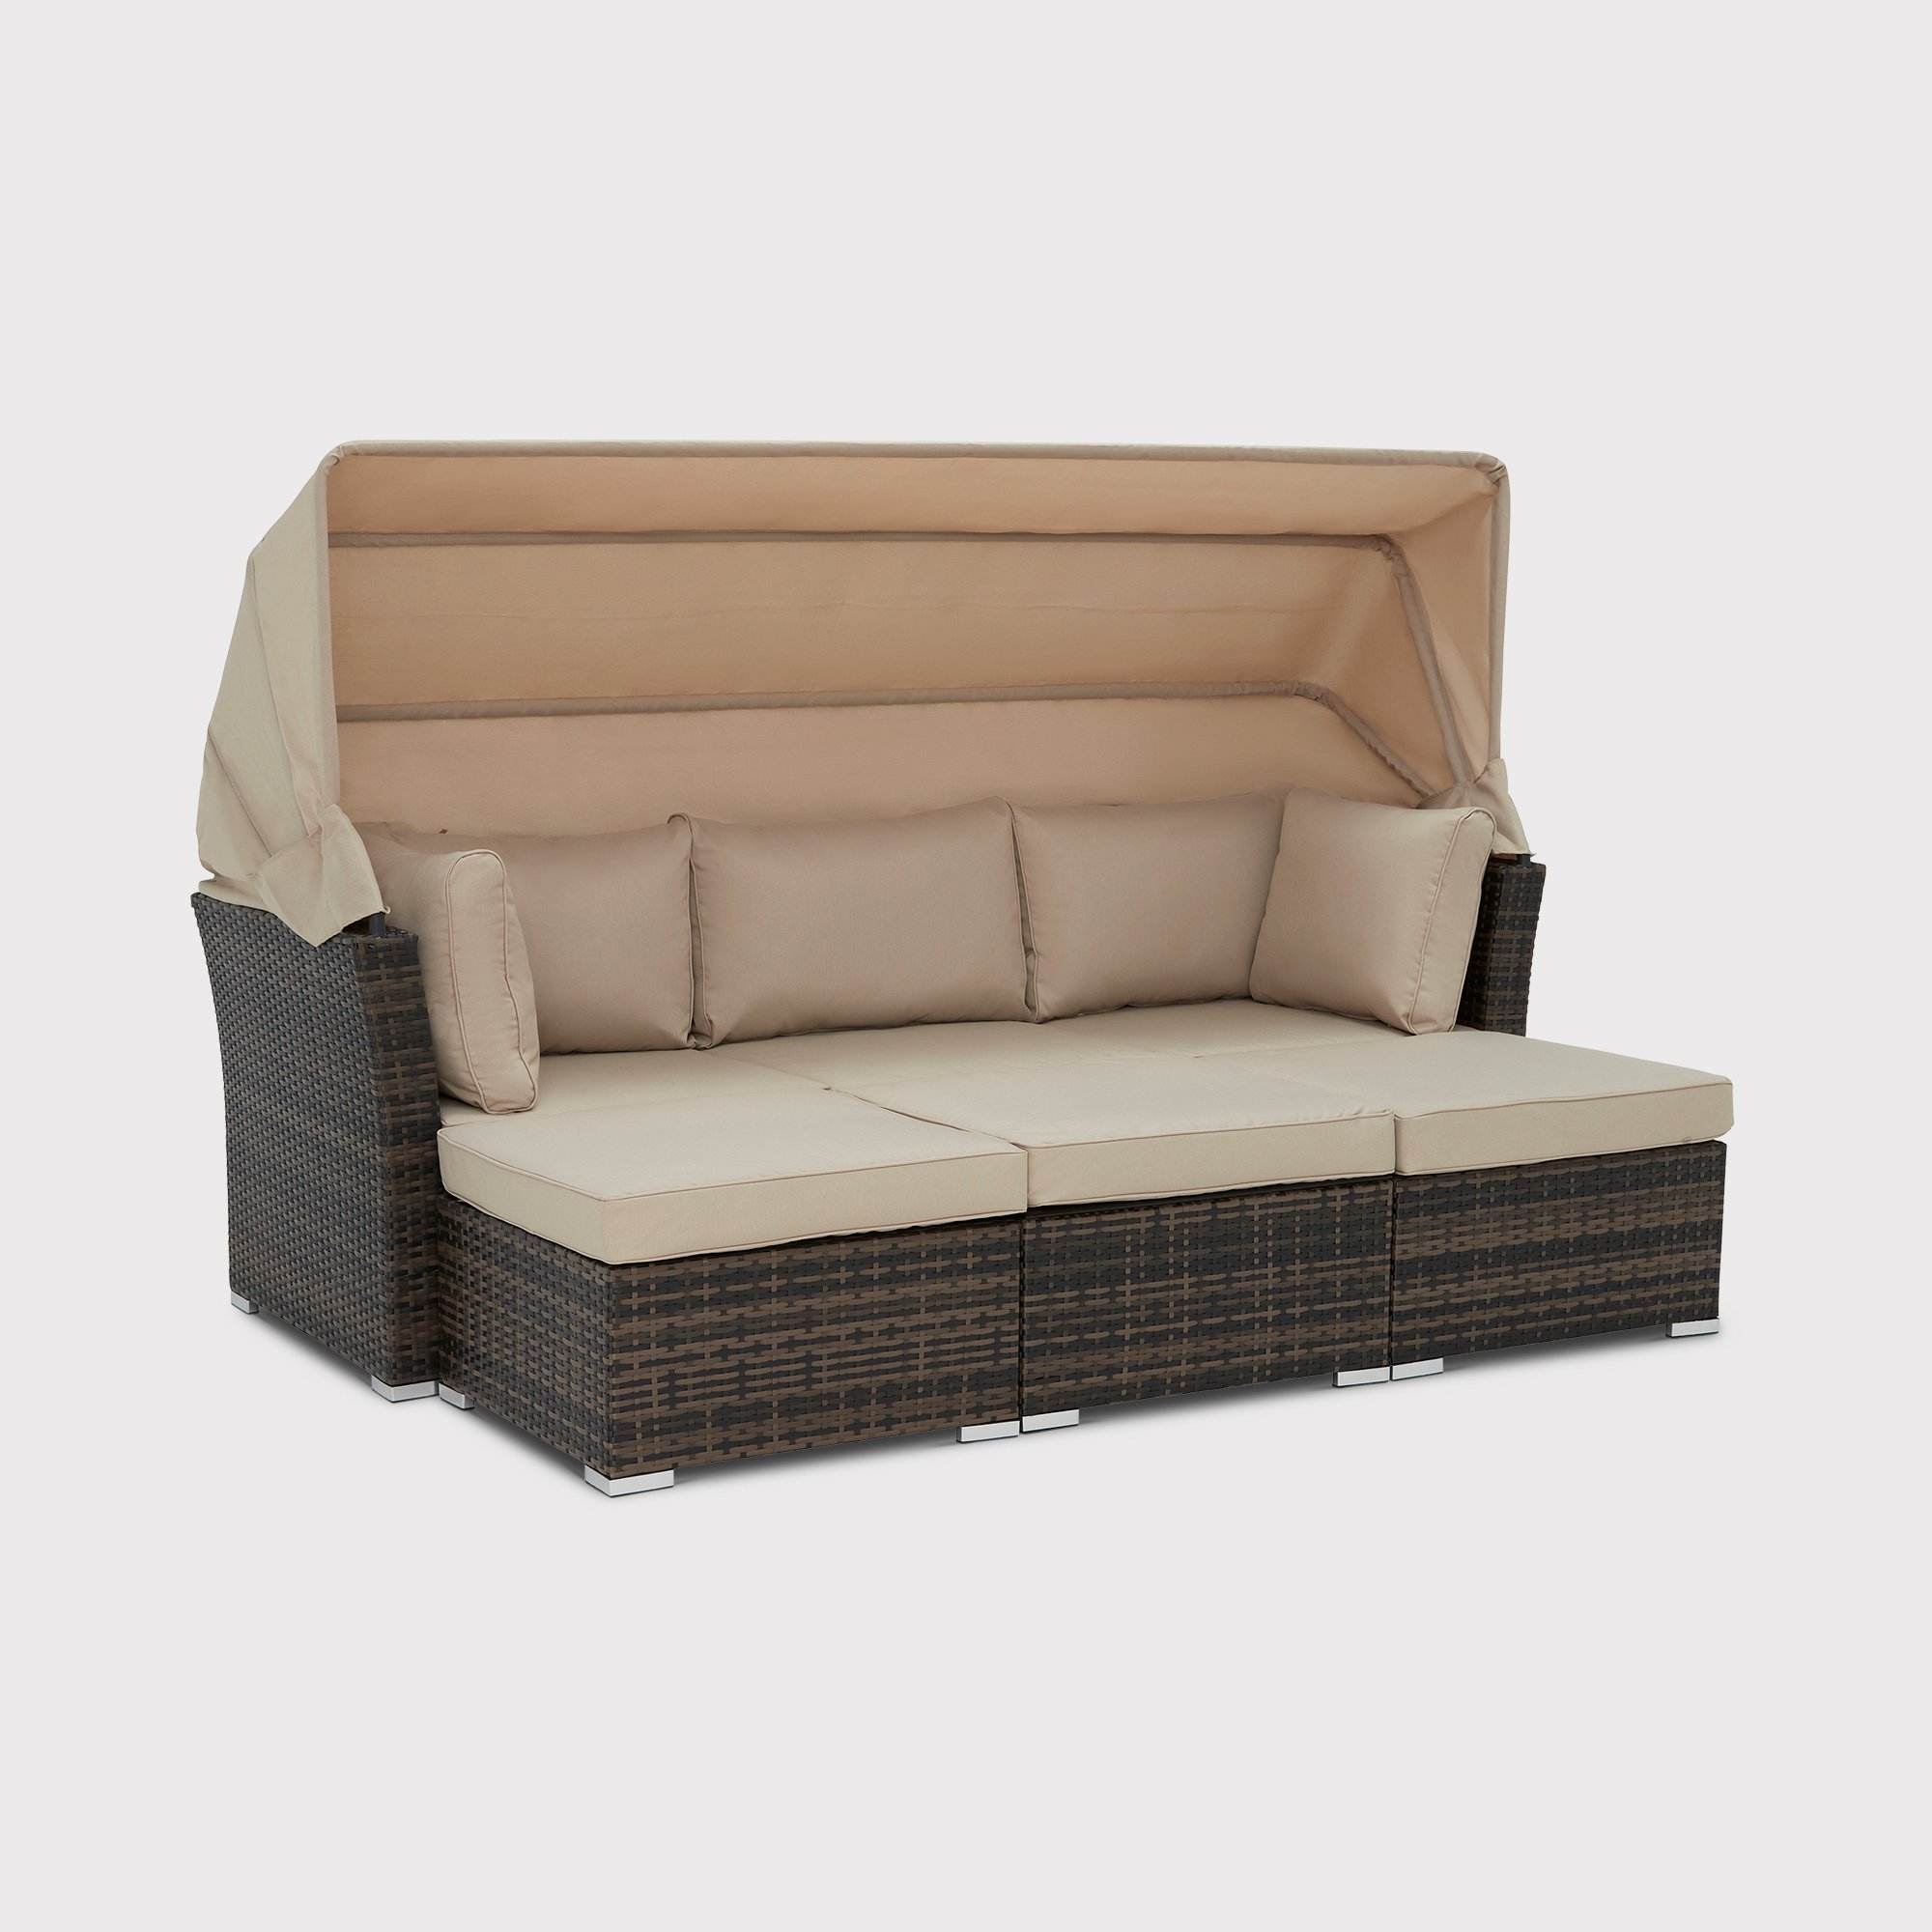 Shanklin Sunbed Set With Canopy, Neutral | Barker & Stonehouse